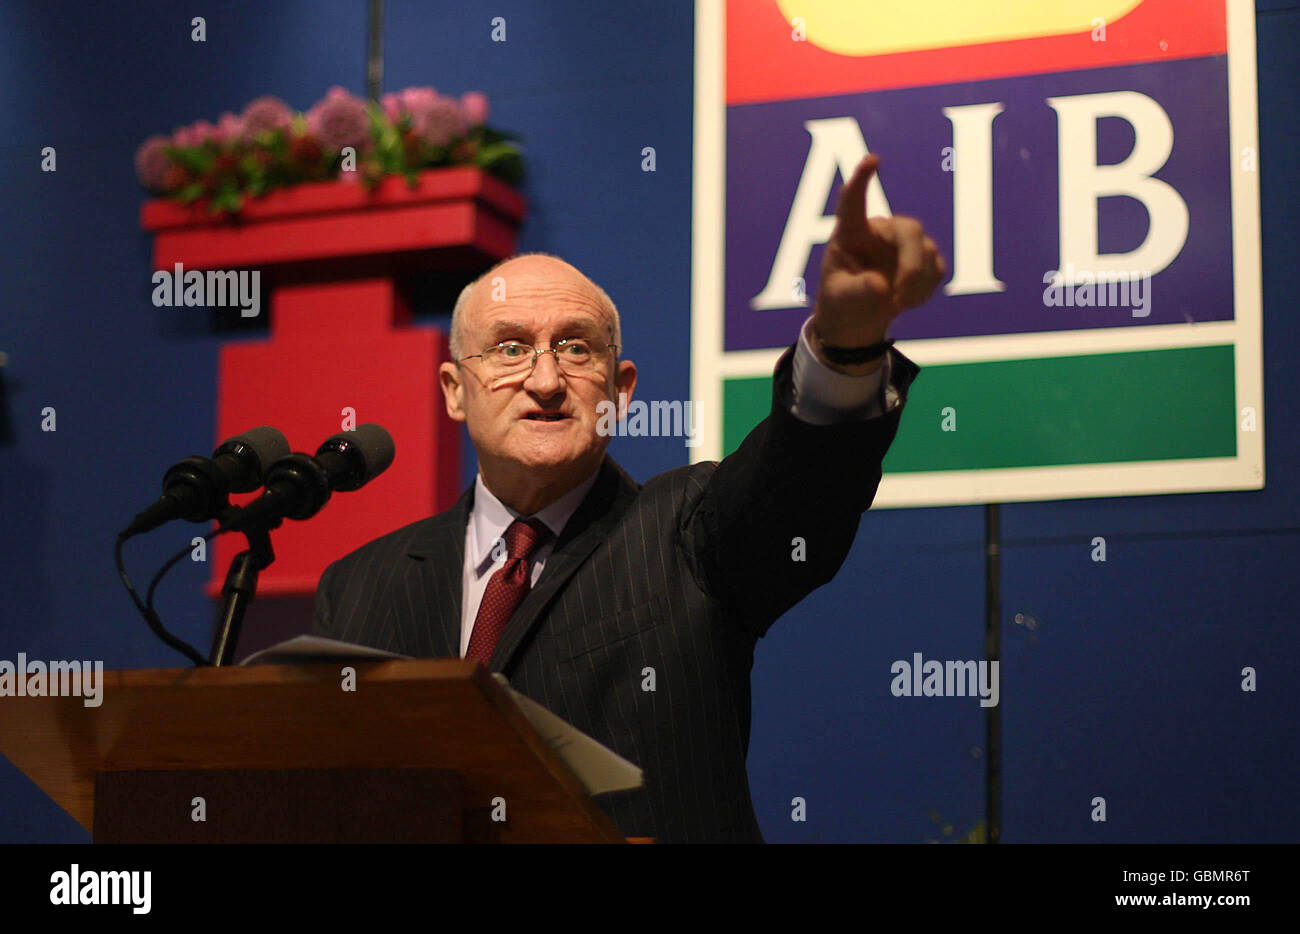 Dermot Gleeson Chairman of Ailled Irish Banks speaks at Ailled Irish Banks Headquarters in Ballsbridge Dublin. Shareholders packed Allied's banking centre for an EGM, where they will later vote to ratify the Government's 3.5 billion euro (3.1 billion) recapitalisation plan. Stock Photo